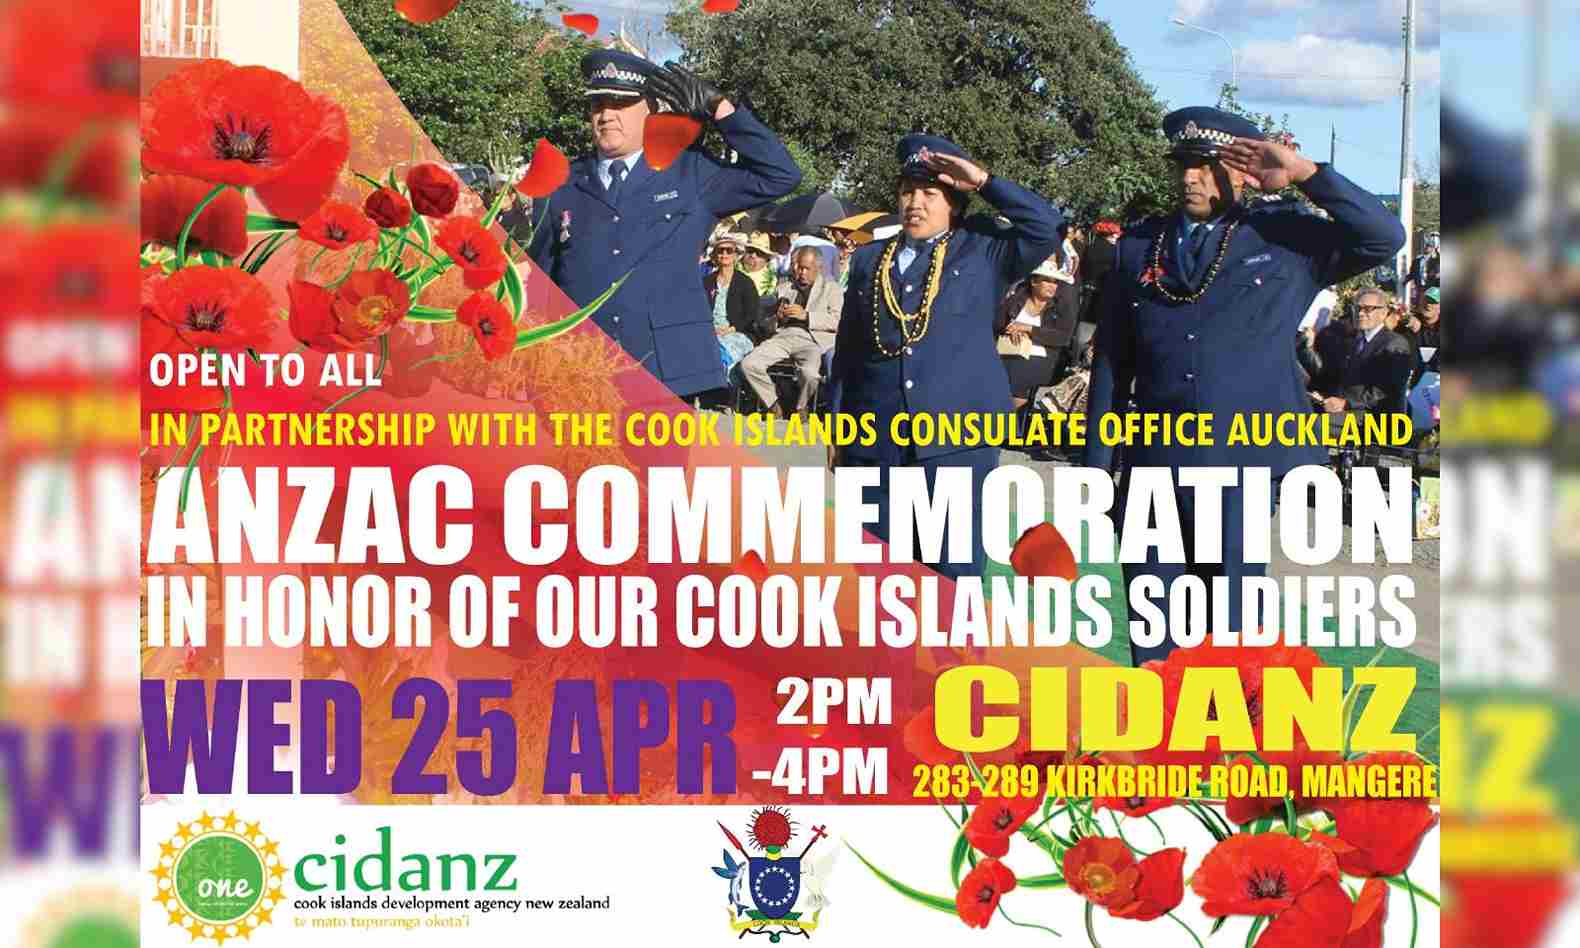 Poster for tomorrow's commemoration in Māngere.